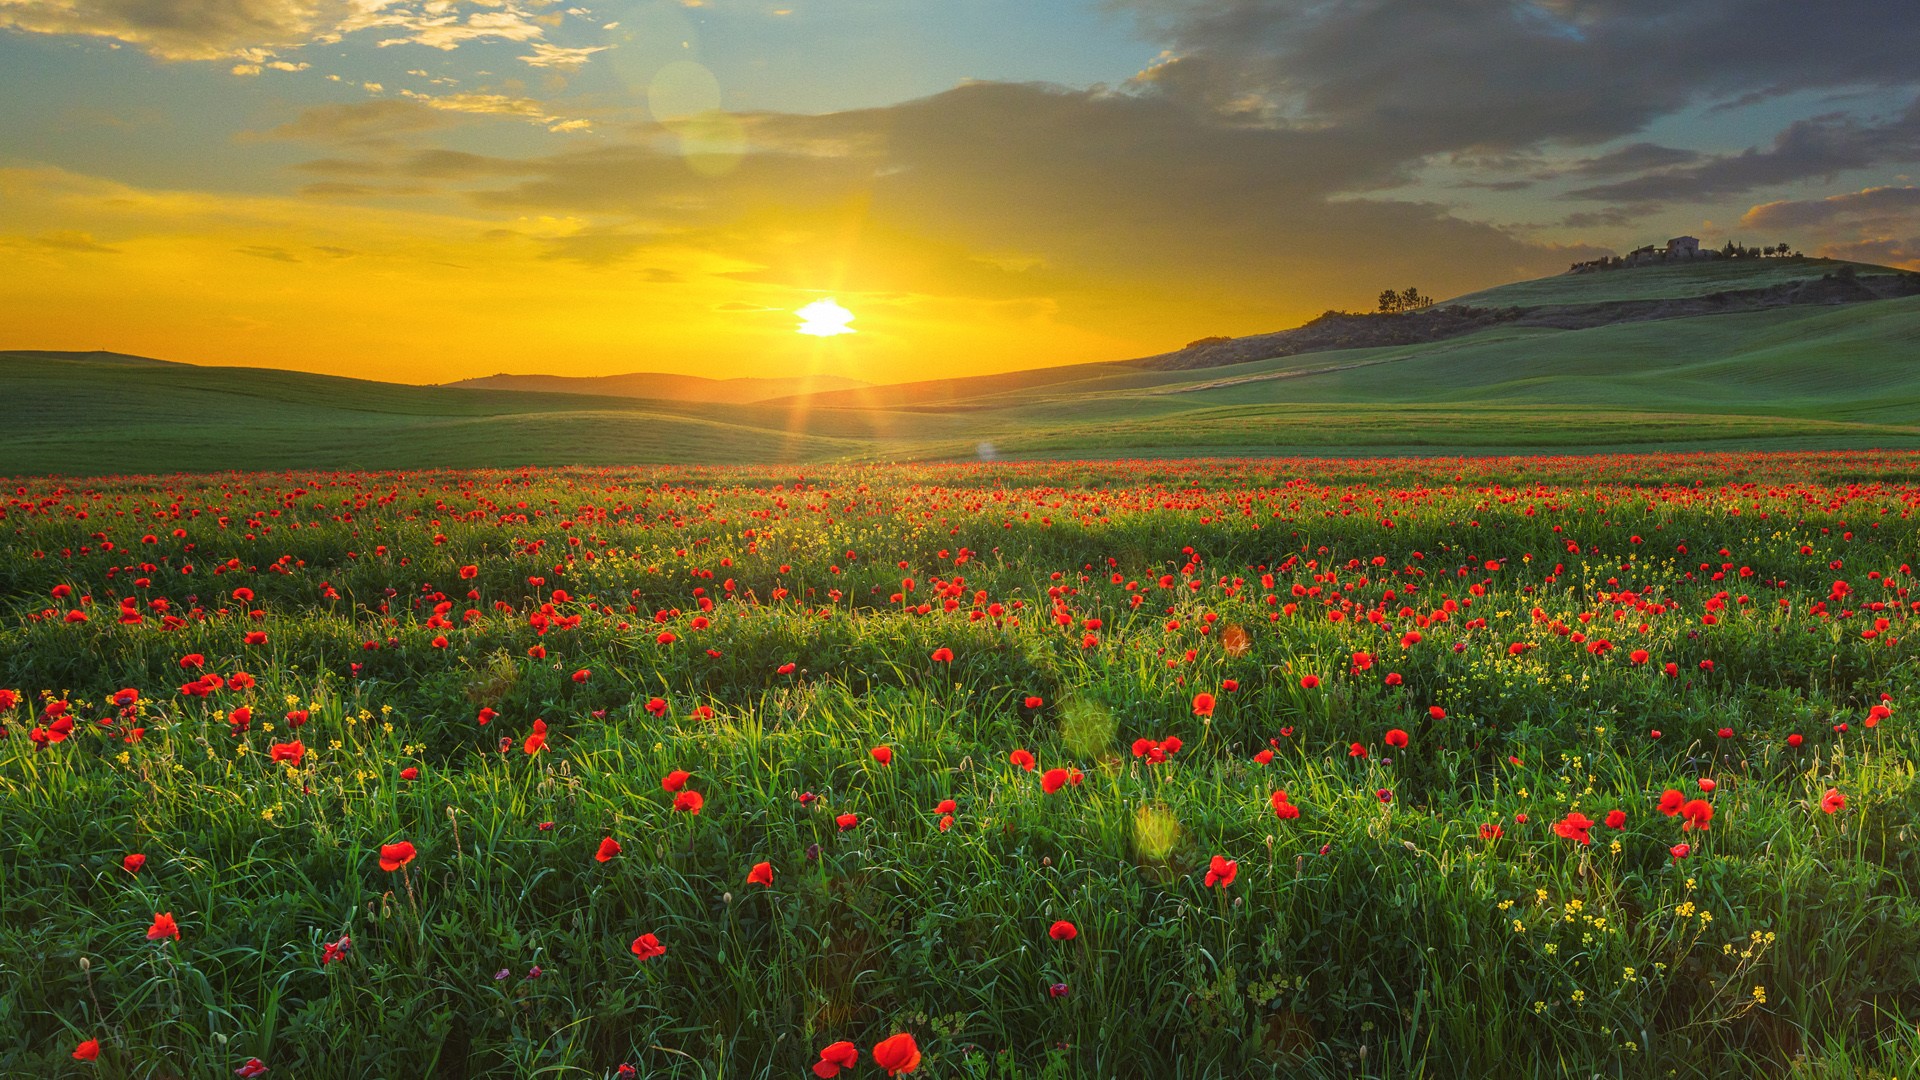 Landscape with poppies in Val d'Orcia at sunset, Tuscany, Italy ...